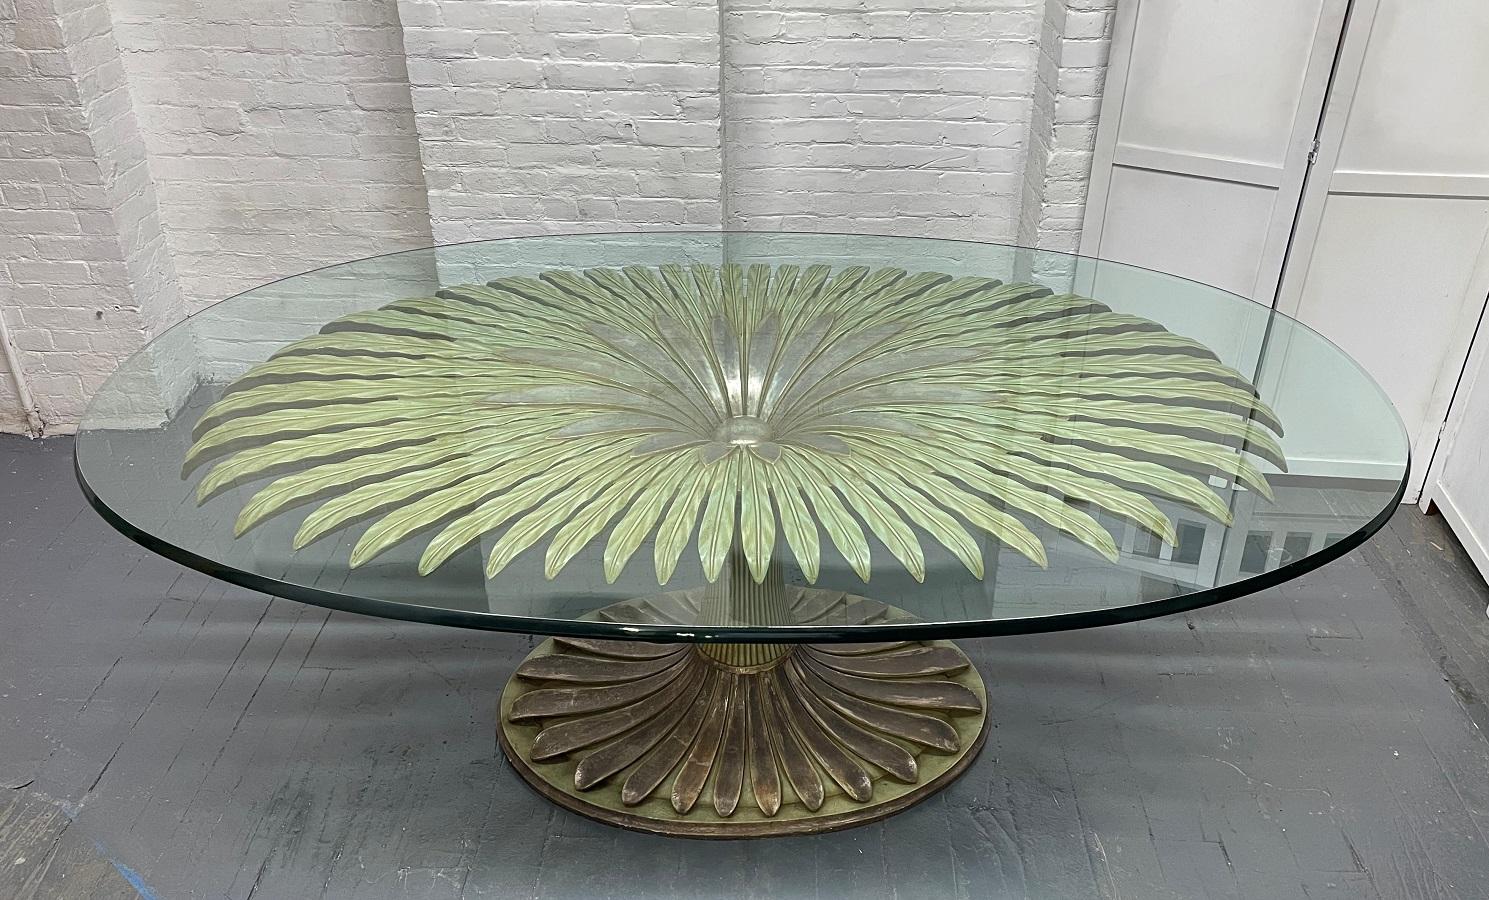 Large palm tree style oval glass top dining table or center table. The base is carved wood with a one inch thick glass. The base of the table is well made with palm tree style design.